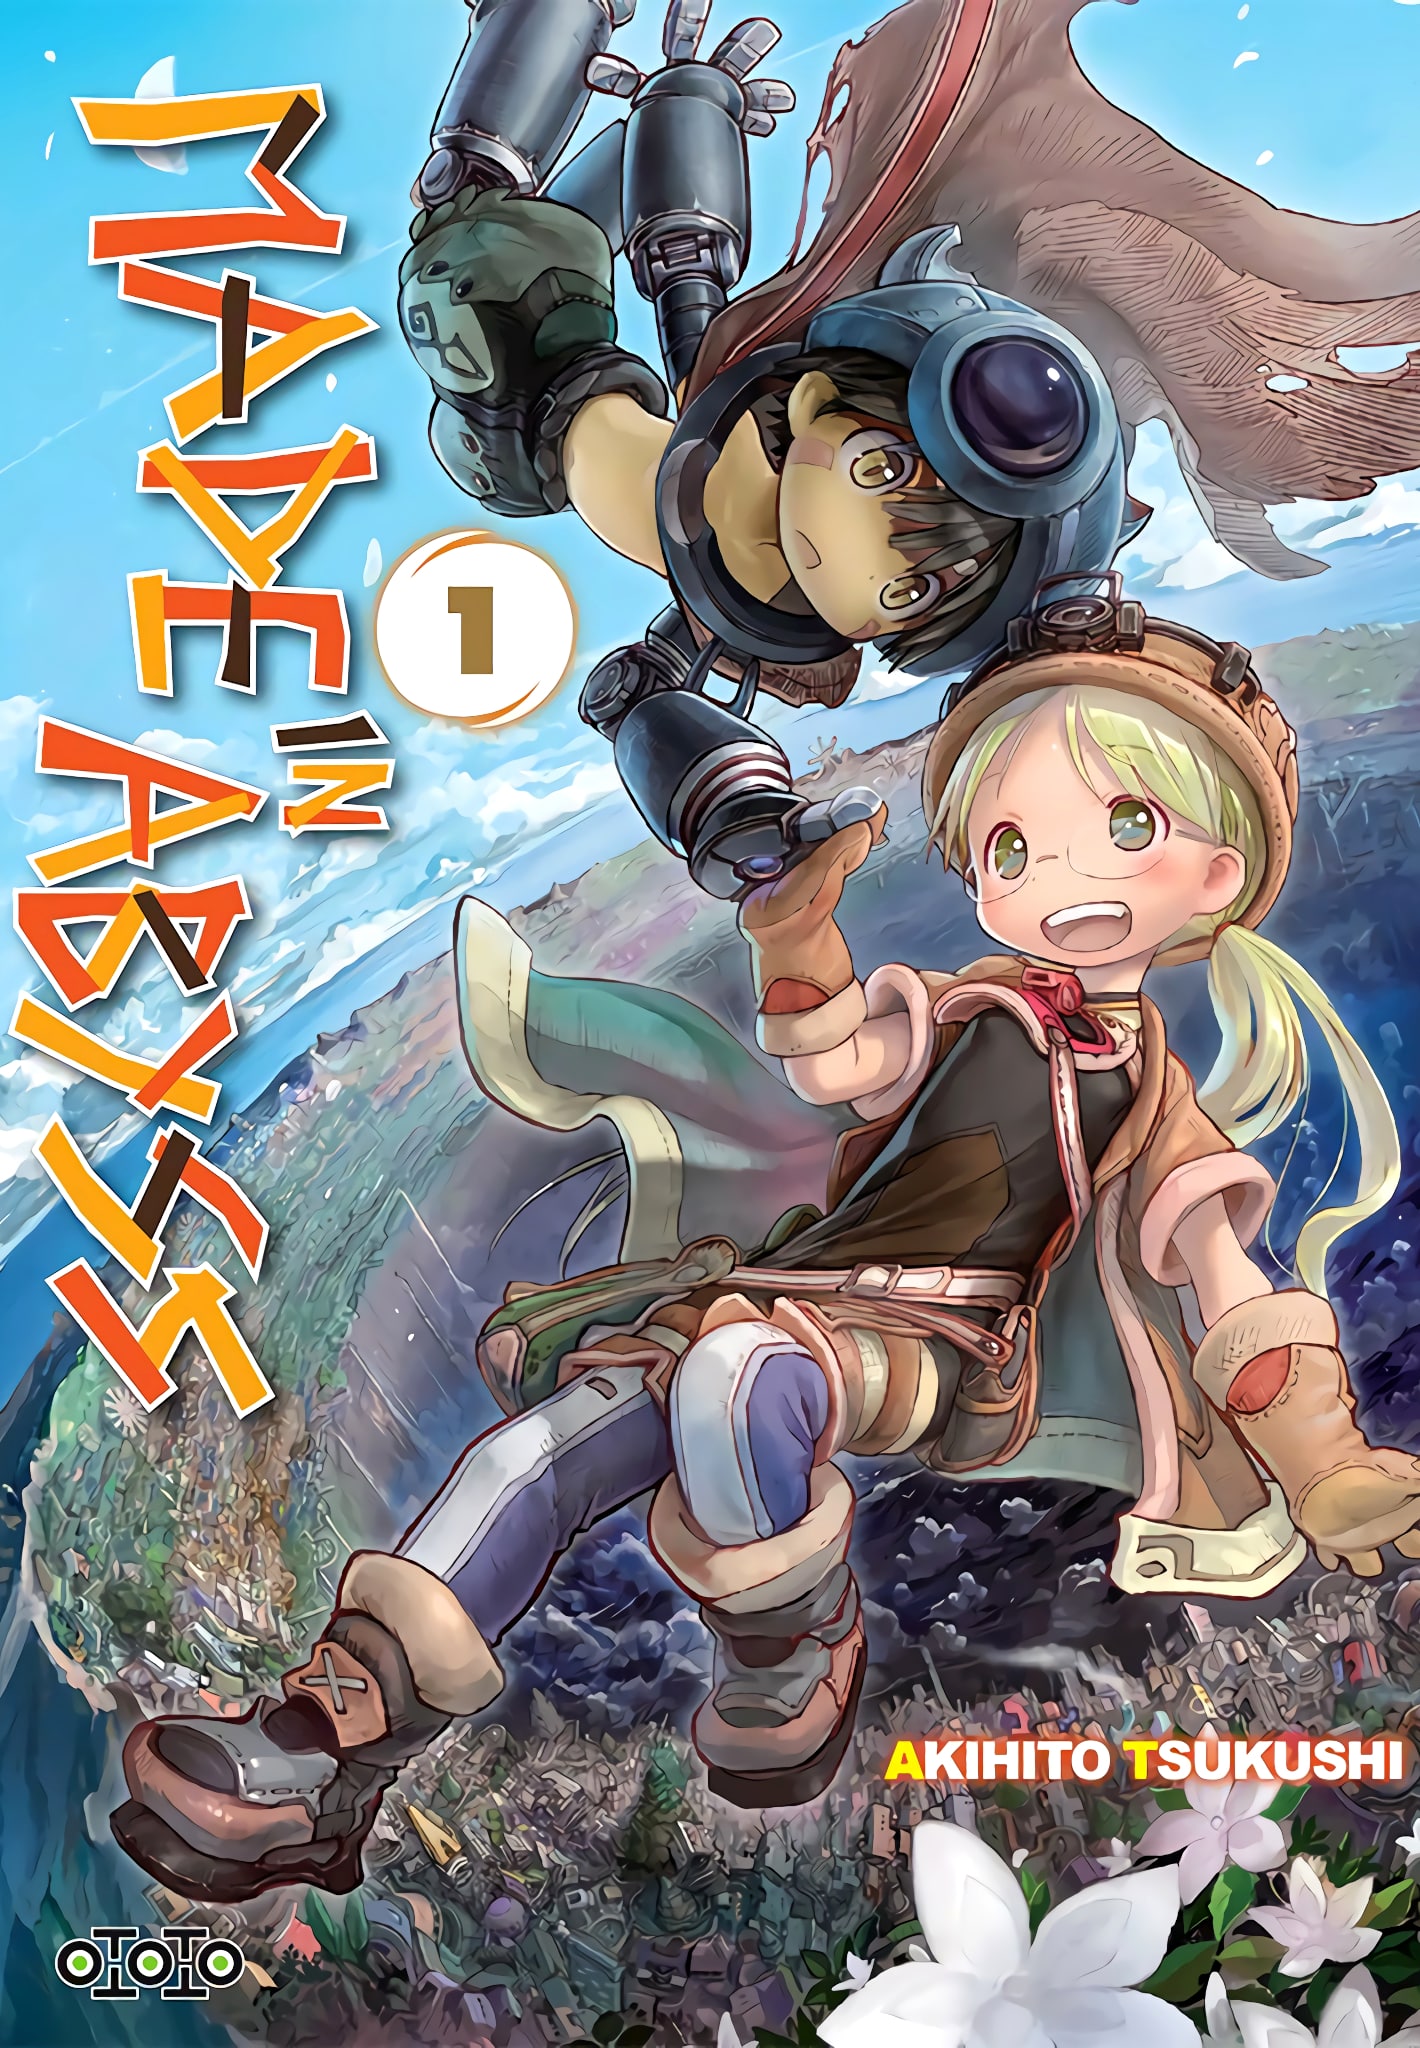 Tome 1 du manga Made in Abyss